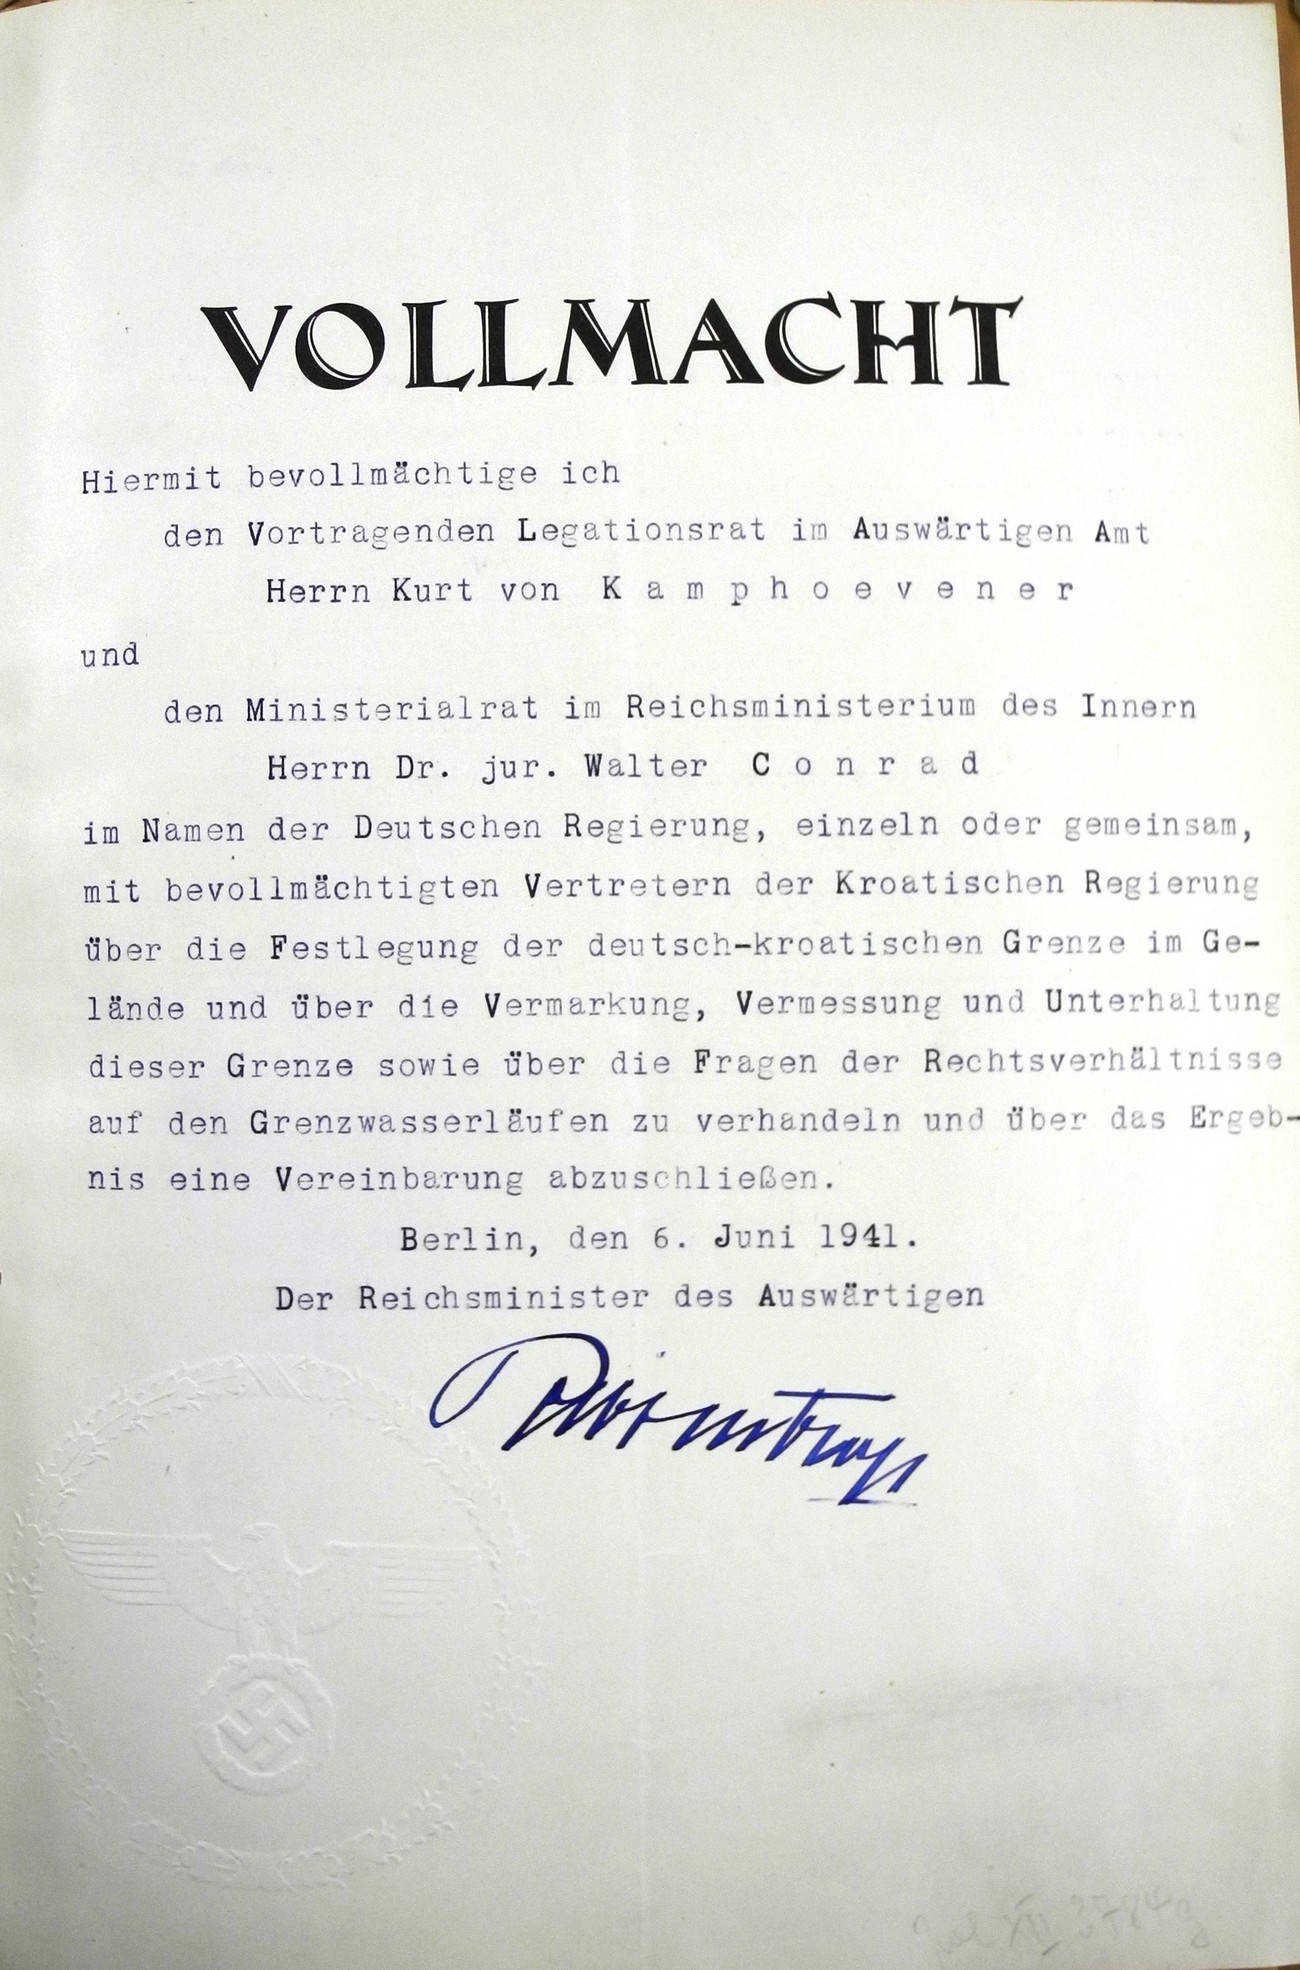 Shown in the photograph is the letter of authorisation from Joachim von Ribbentrop (Germany's foreign minister between 1938 and 1945) to Kamphoevener to manage border-related affairs with the NDH, Italy and Hungary. His decisions also greatly influenced the border issues in the vicinity of Rogaška Slatina. Source: Politisches Archiv des Auswärtigen Amts Berlin.